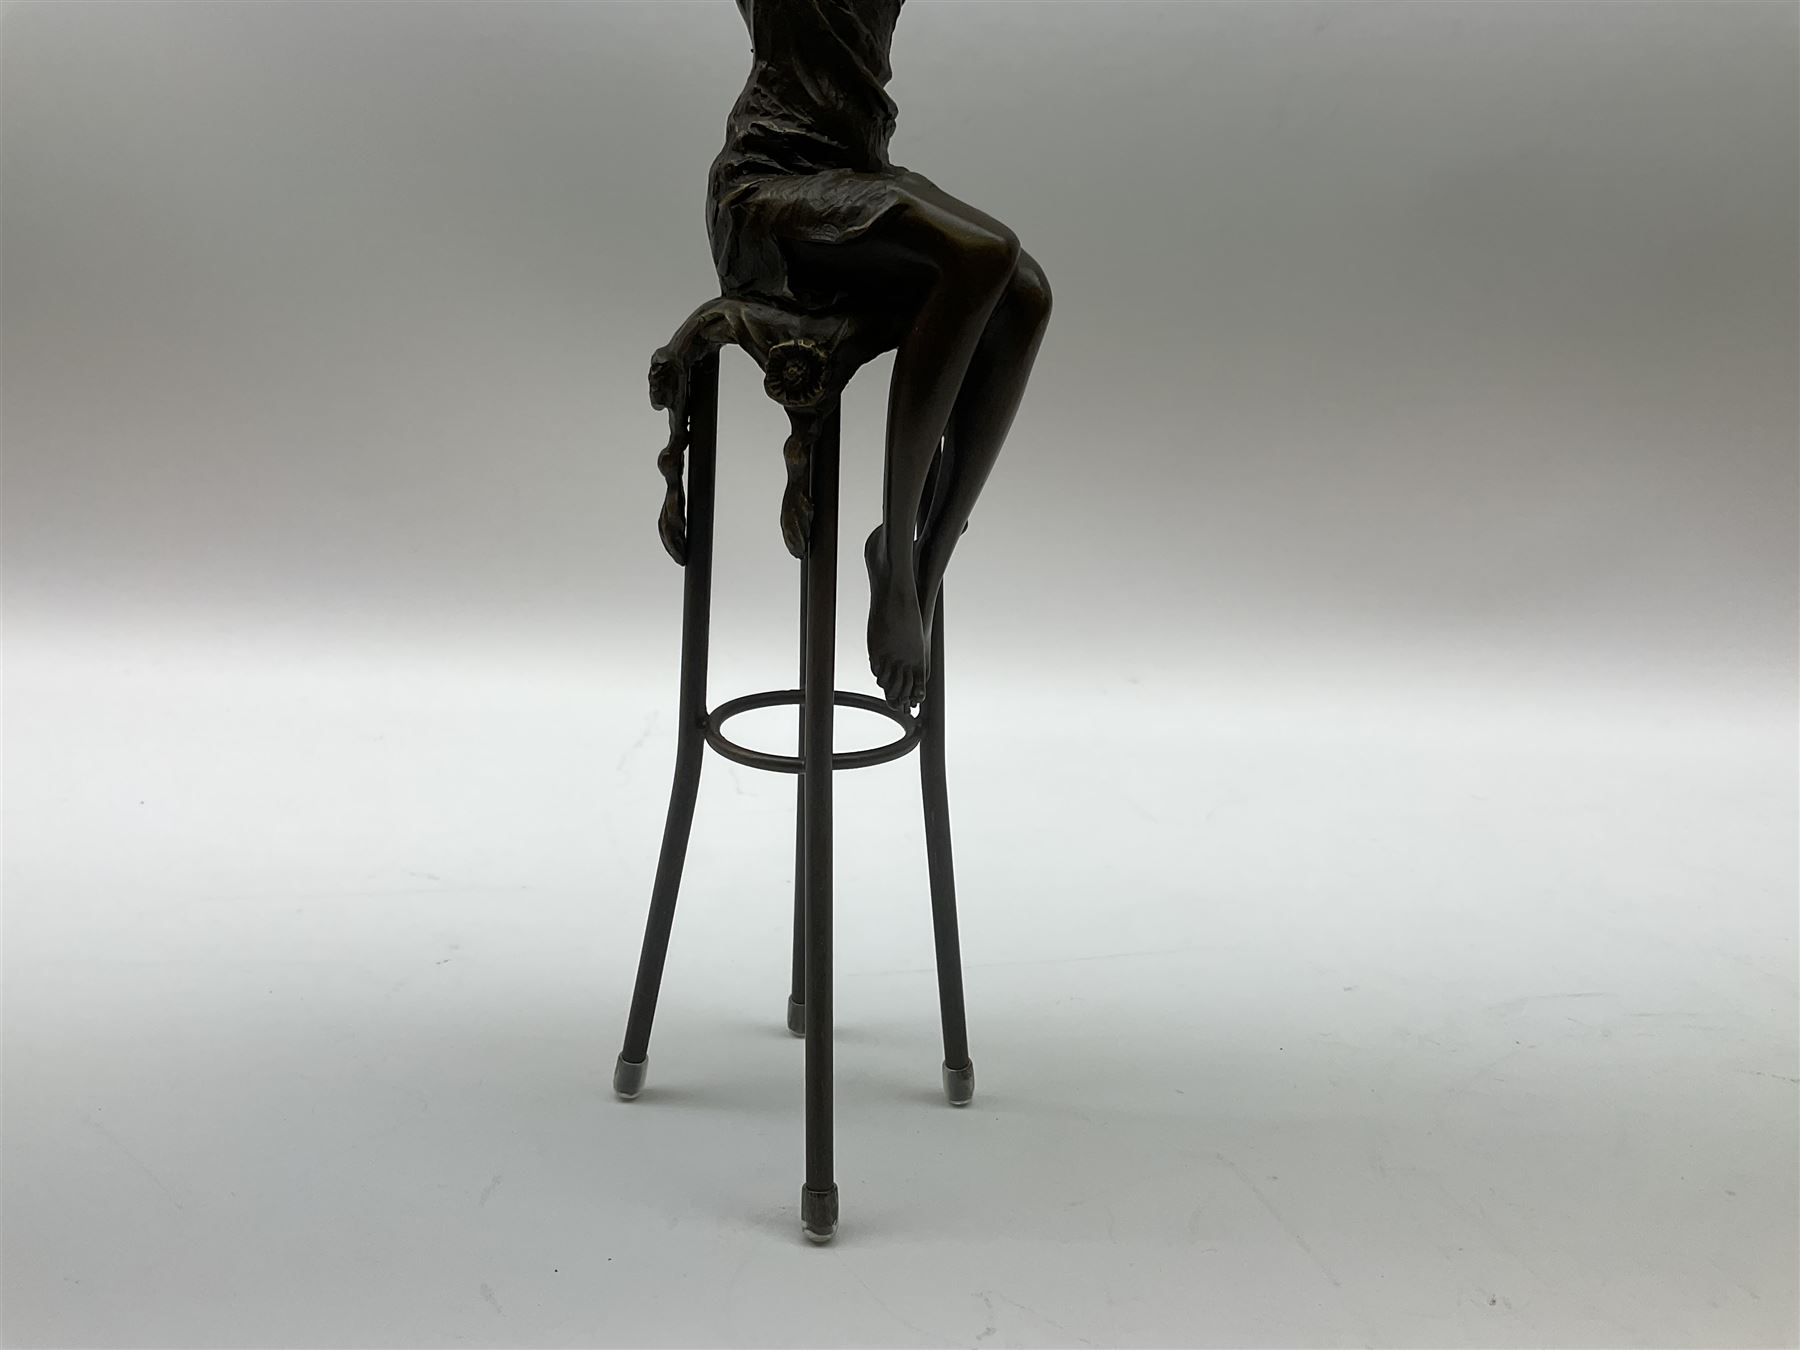 Art Deco style bronze modelled as a female figure seated upon a chair - Image 3 of 8